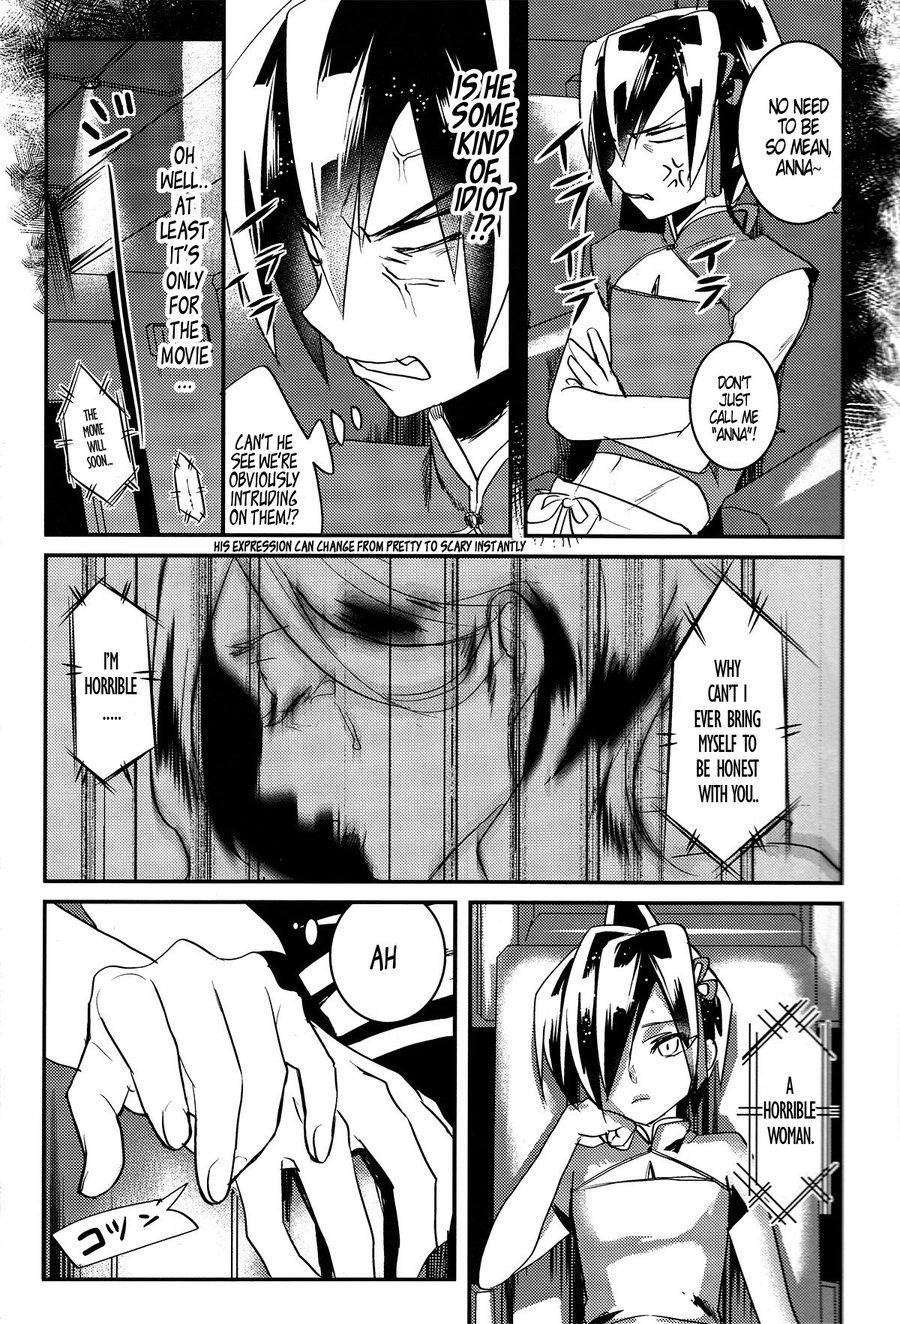 Gros Seins Lie and Heart - Shaman king Free Fuck - Page 9